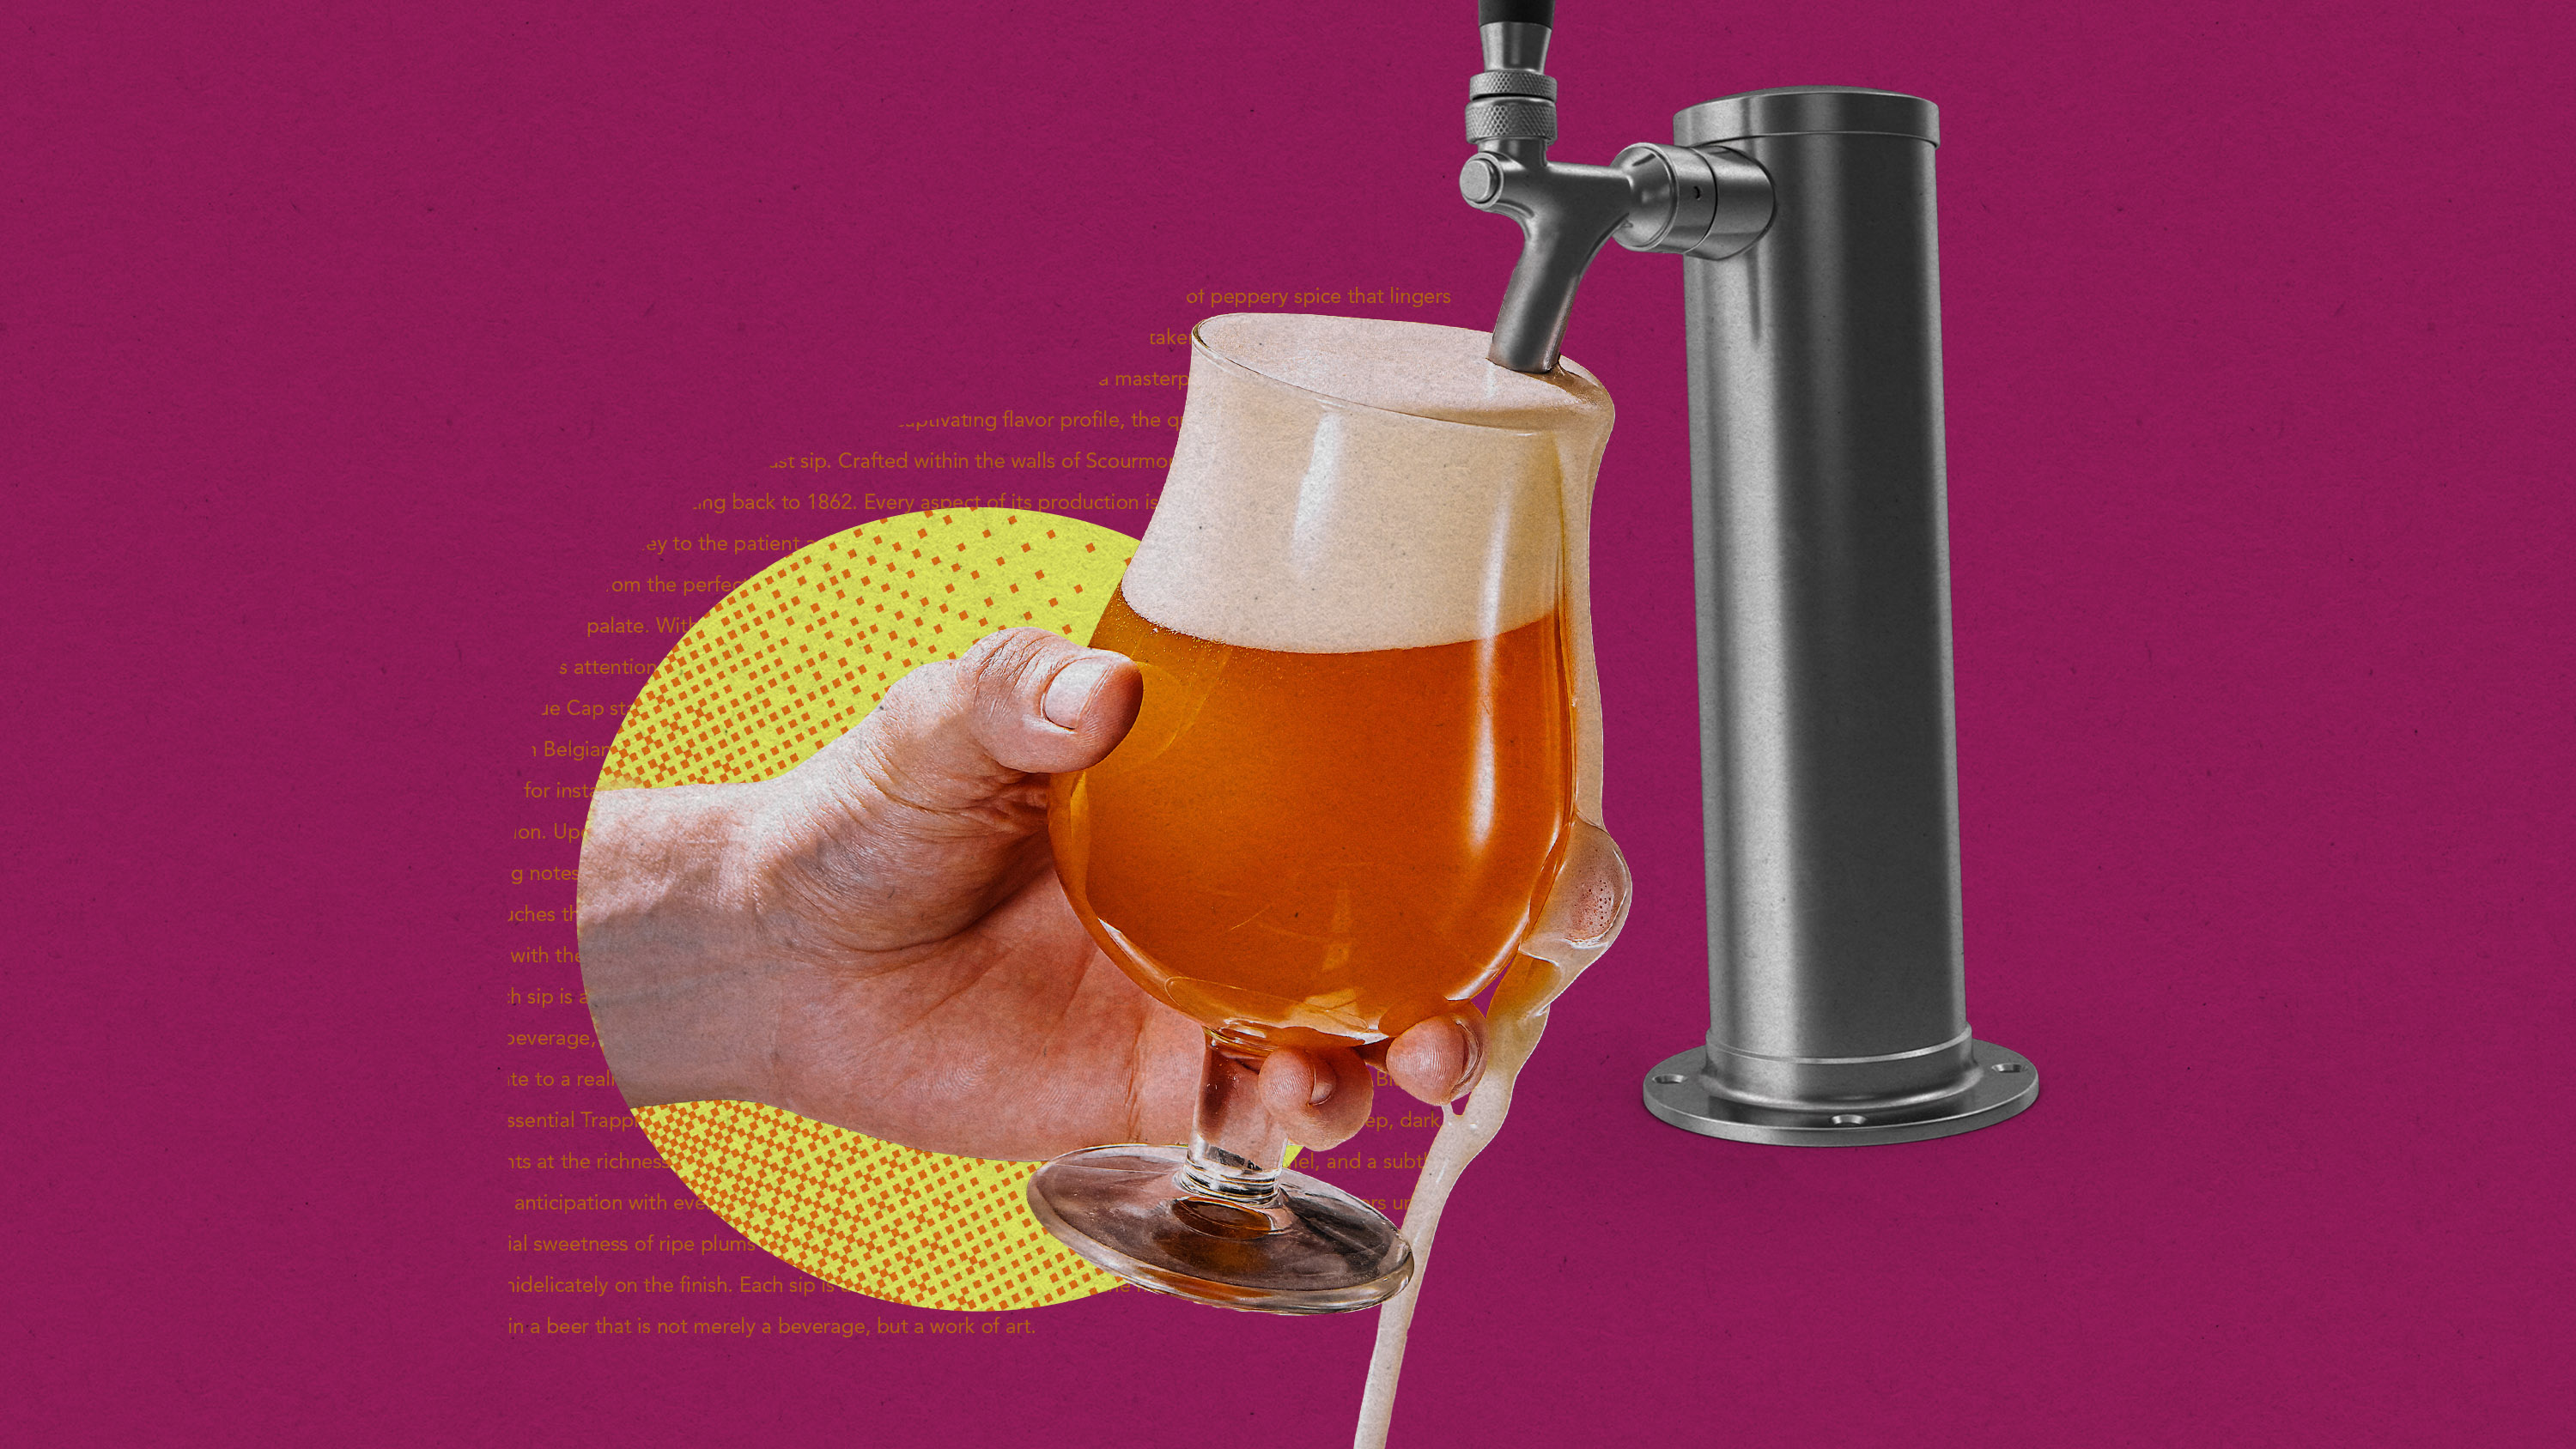 How AI has the potential to revolutionize beer making